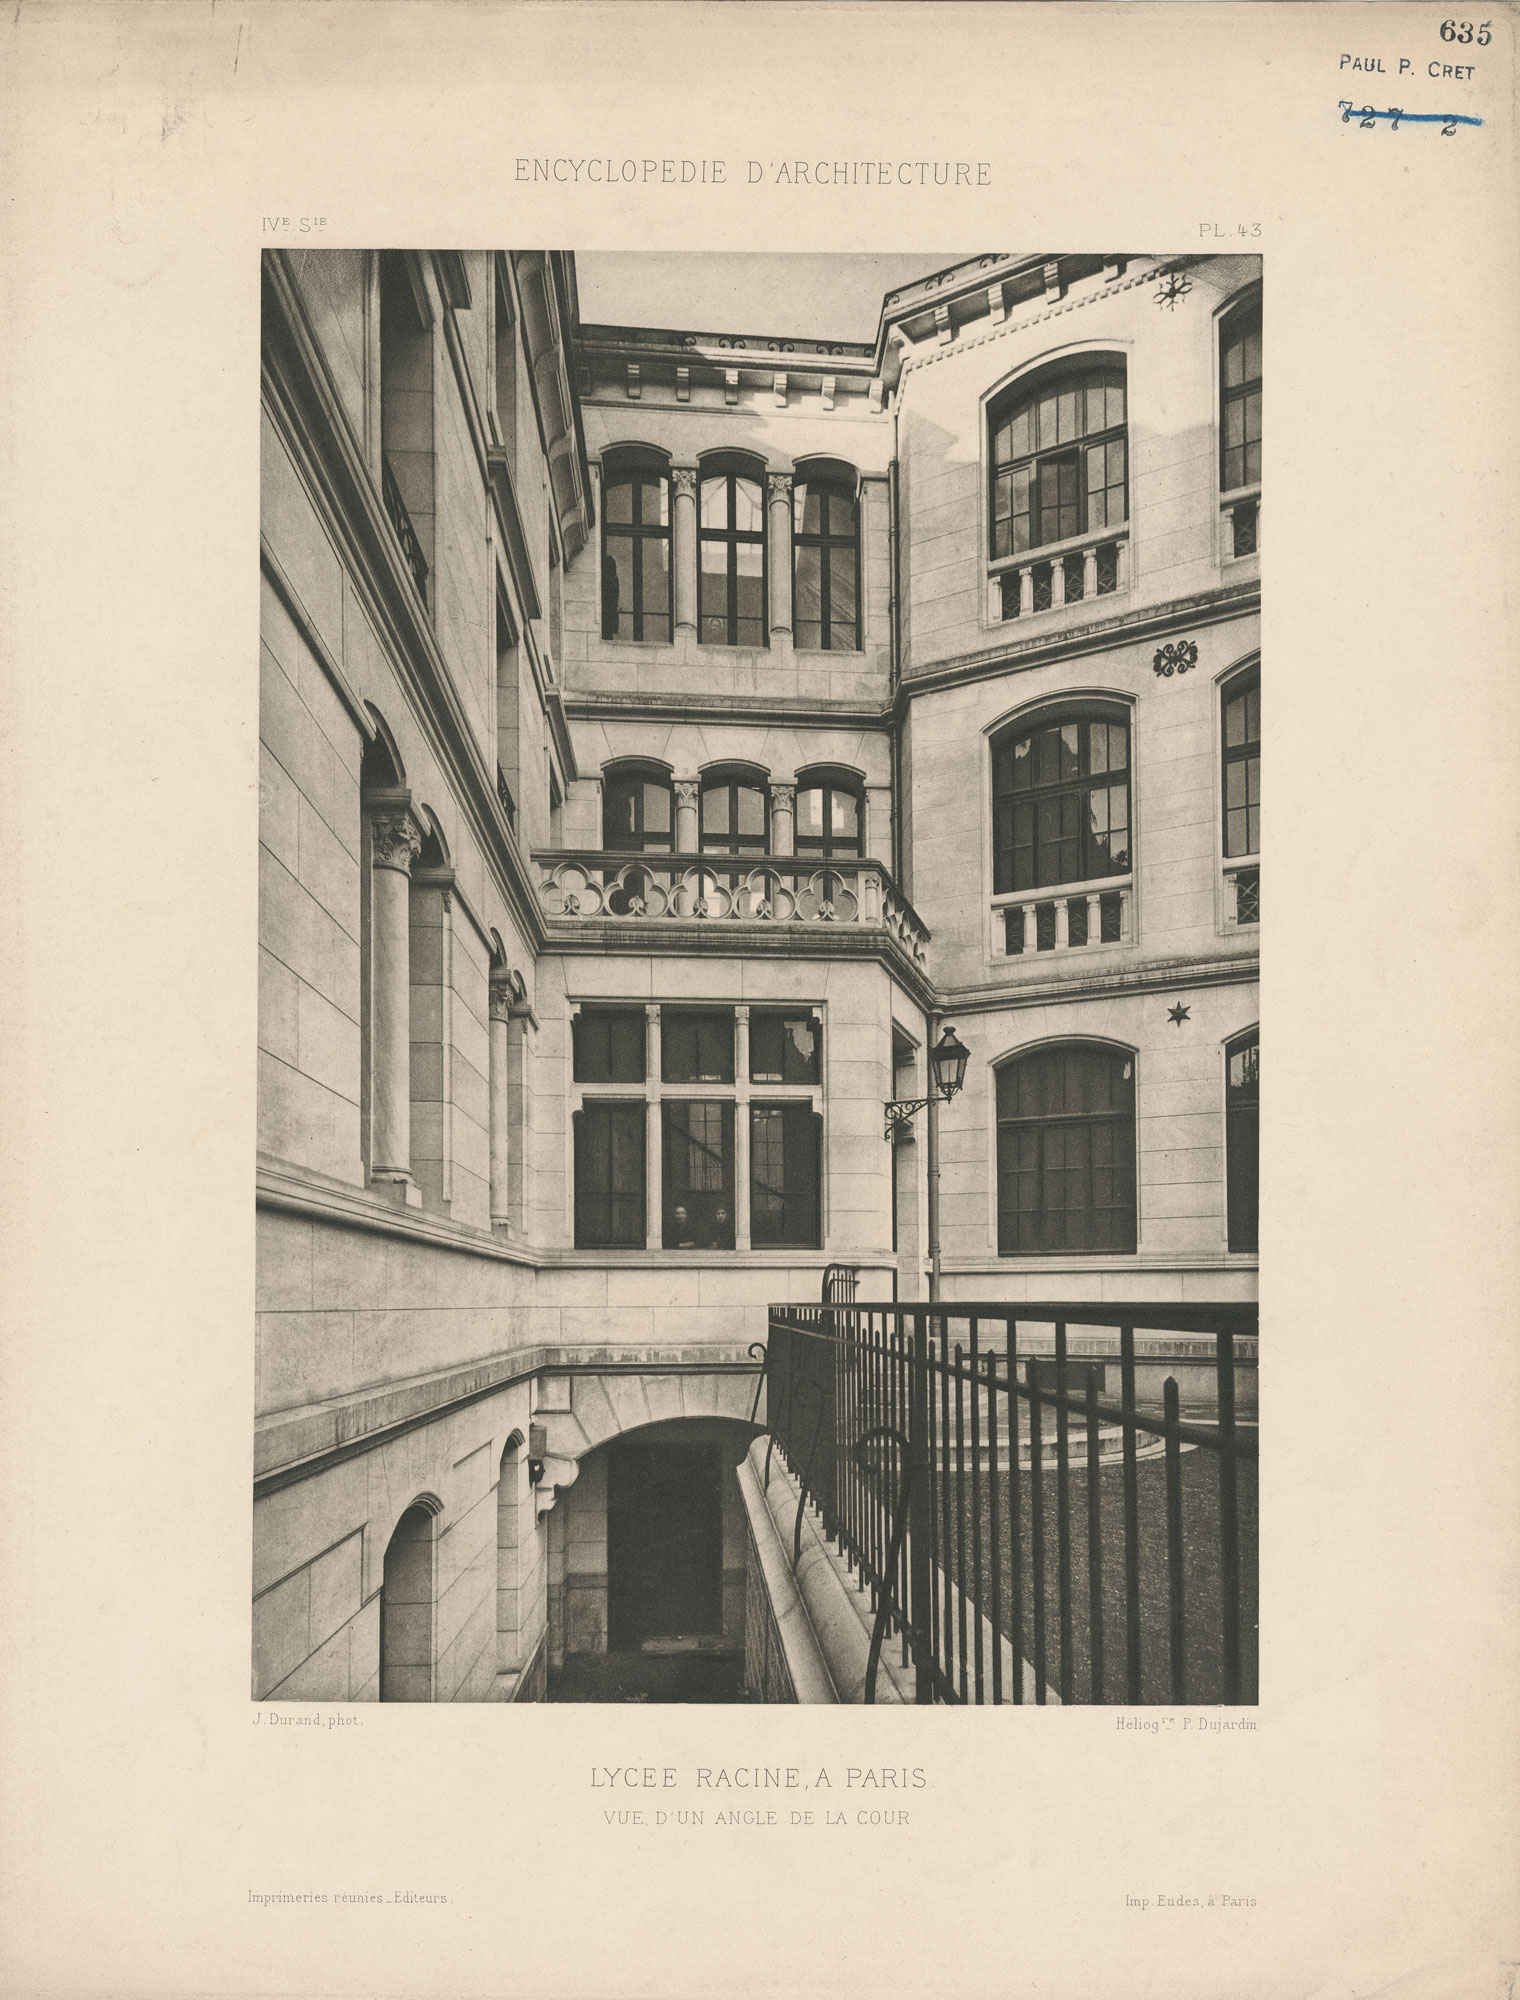 Image of the courtyard of an nineteenth century apartment building